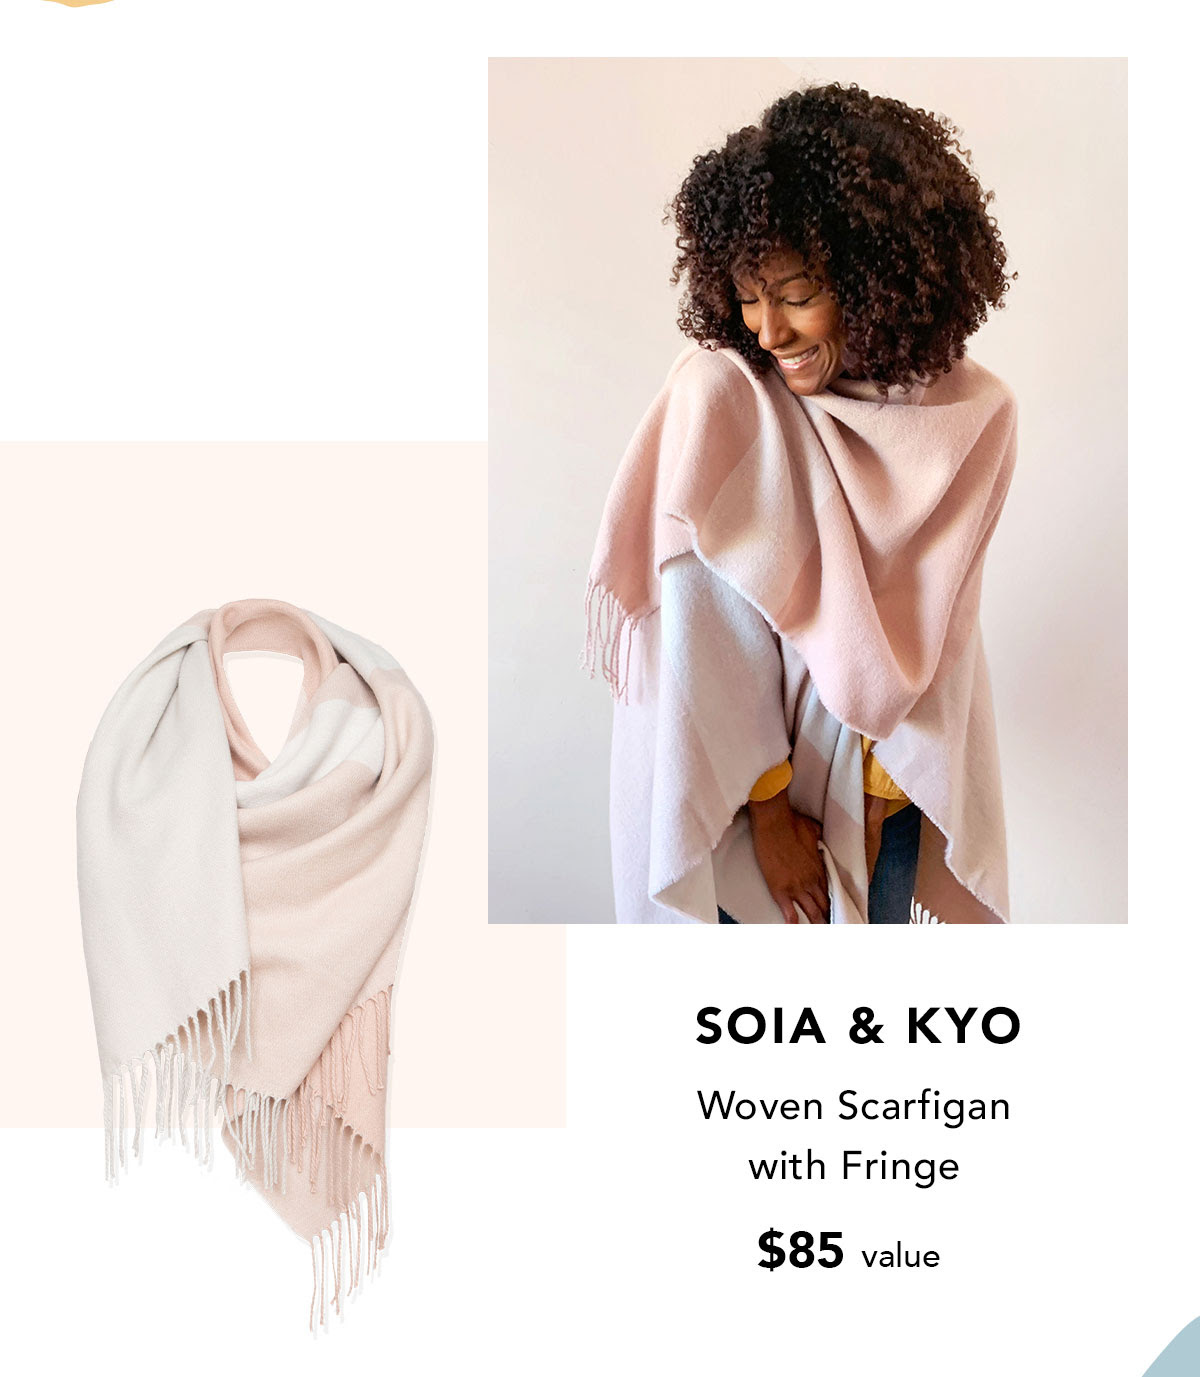 SOIA & KYO Woven Scarfigan with Fringe $85 value